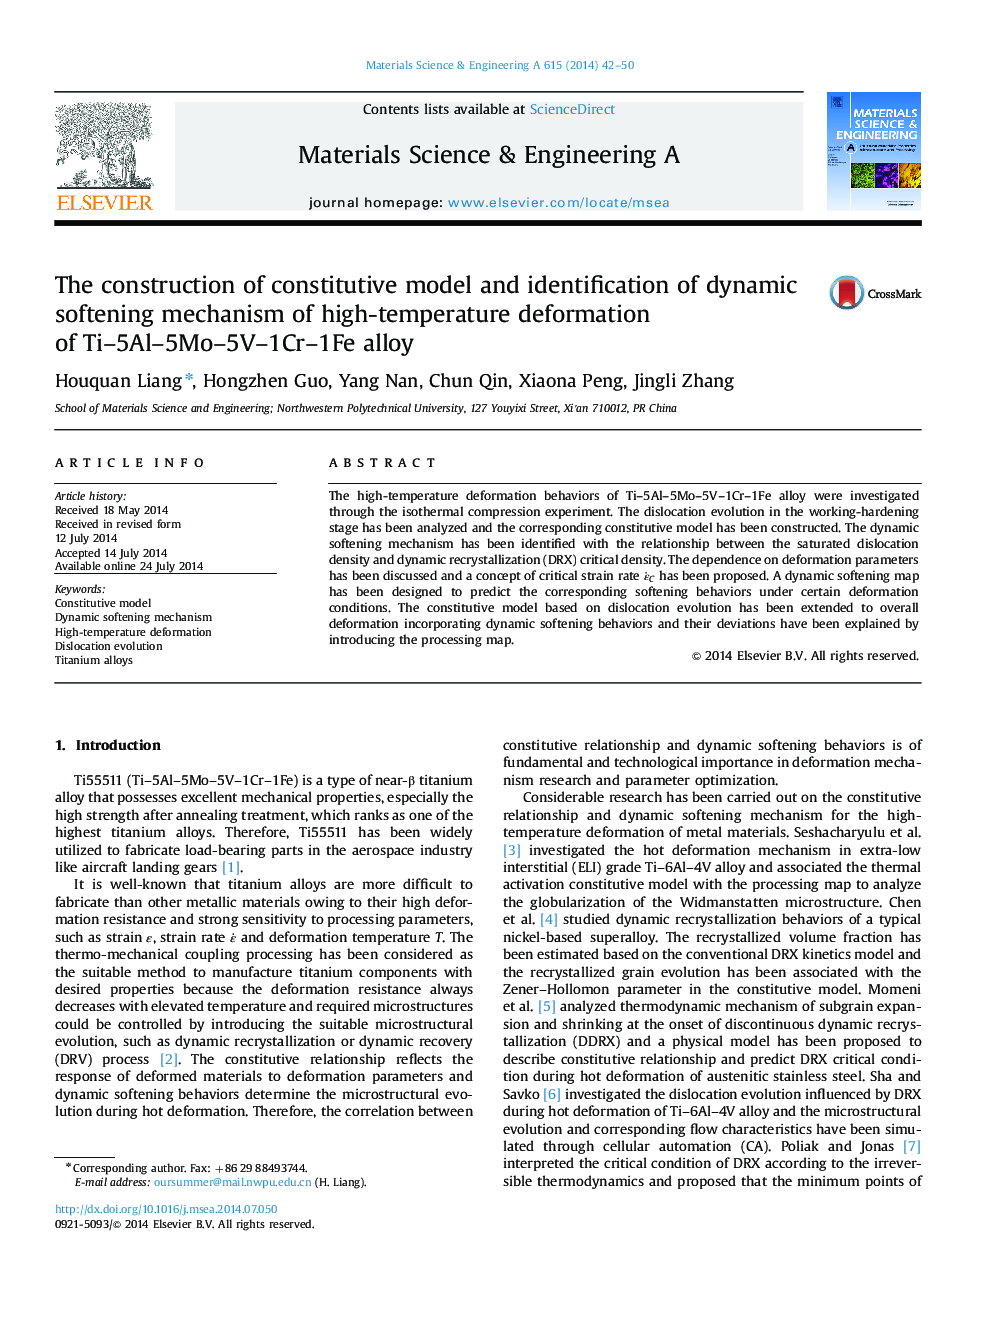 The construction of constitutive model and identification of dynamic softening mechanism of high-temperature deformation of Ti-5Al-5Mo-5V-1Cr-1Fe alloy